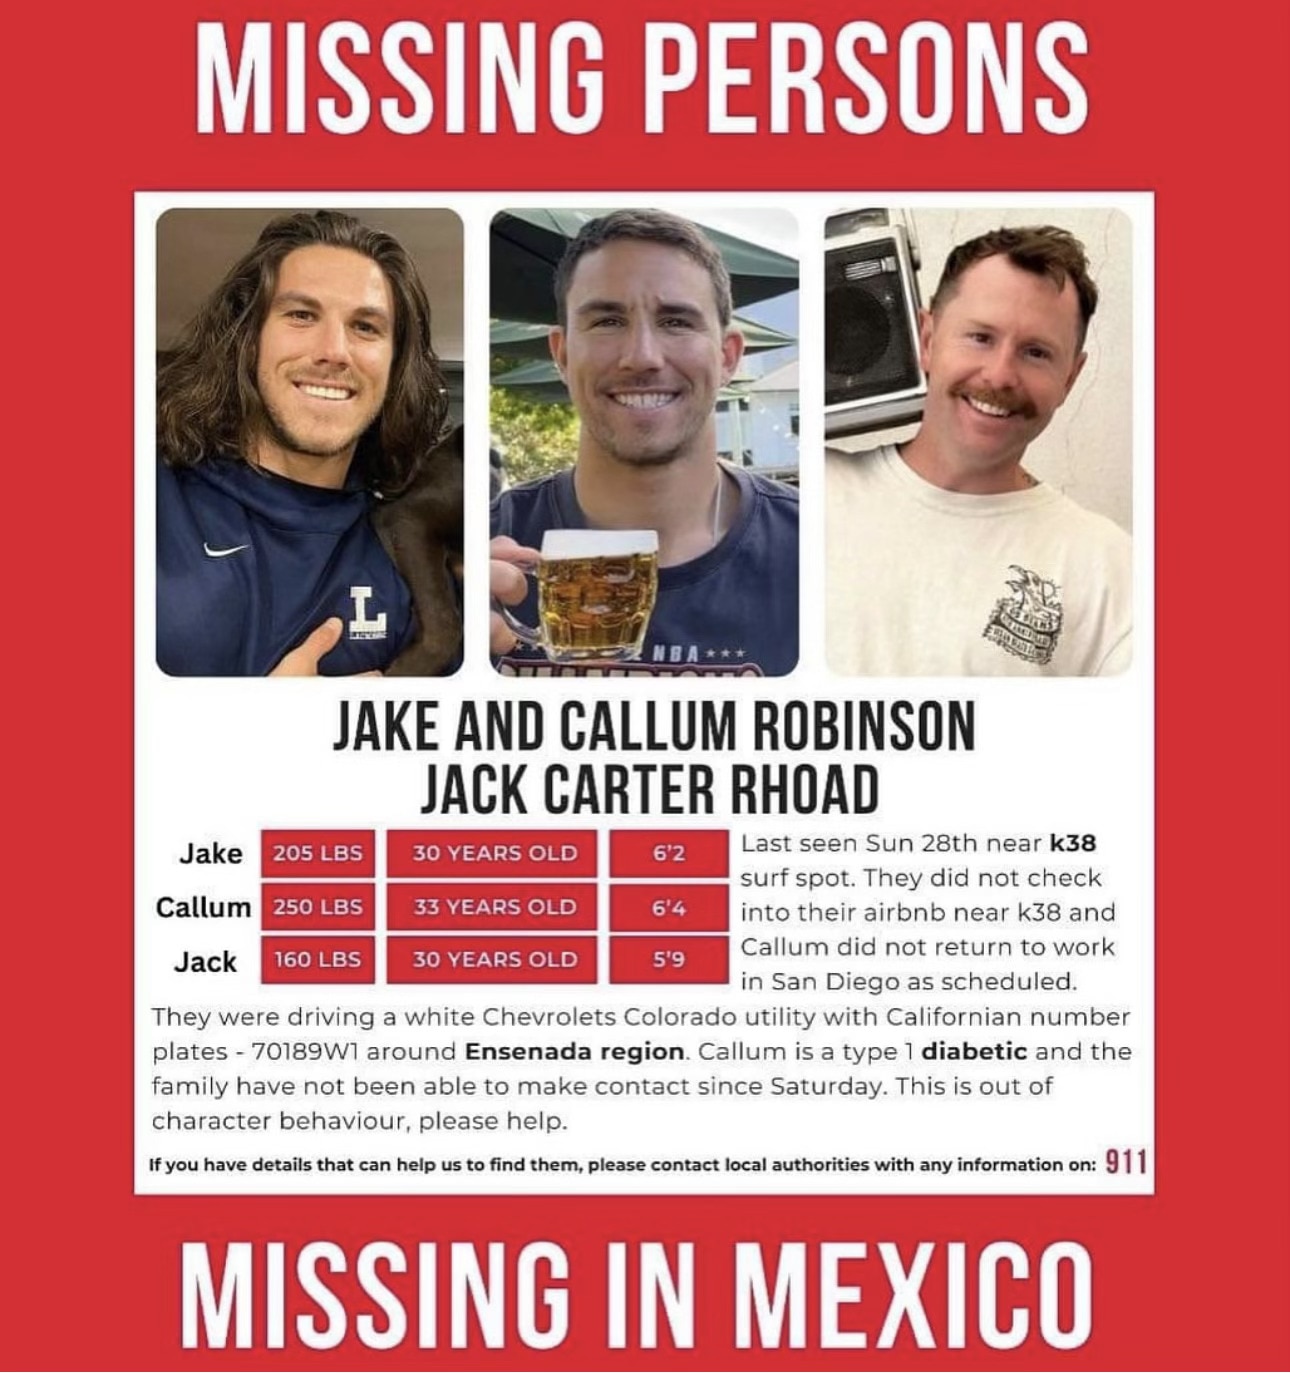 A red and white missing persons poster with photographs of brothers Callum and Jake Robinson and a third man.